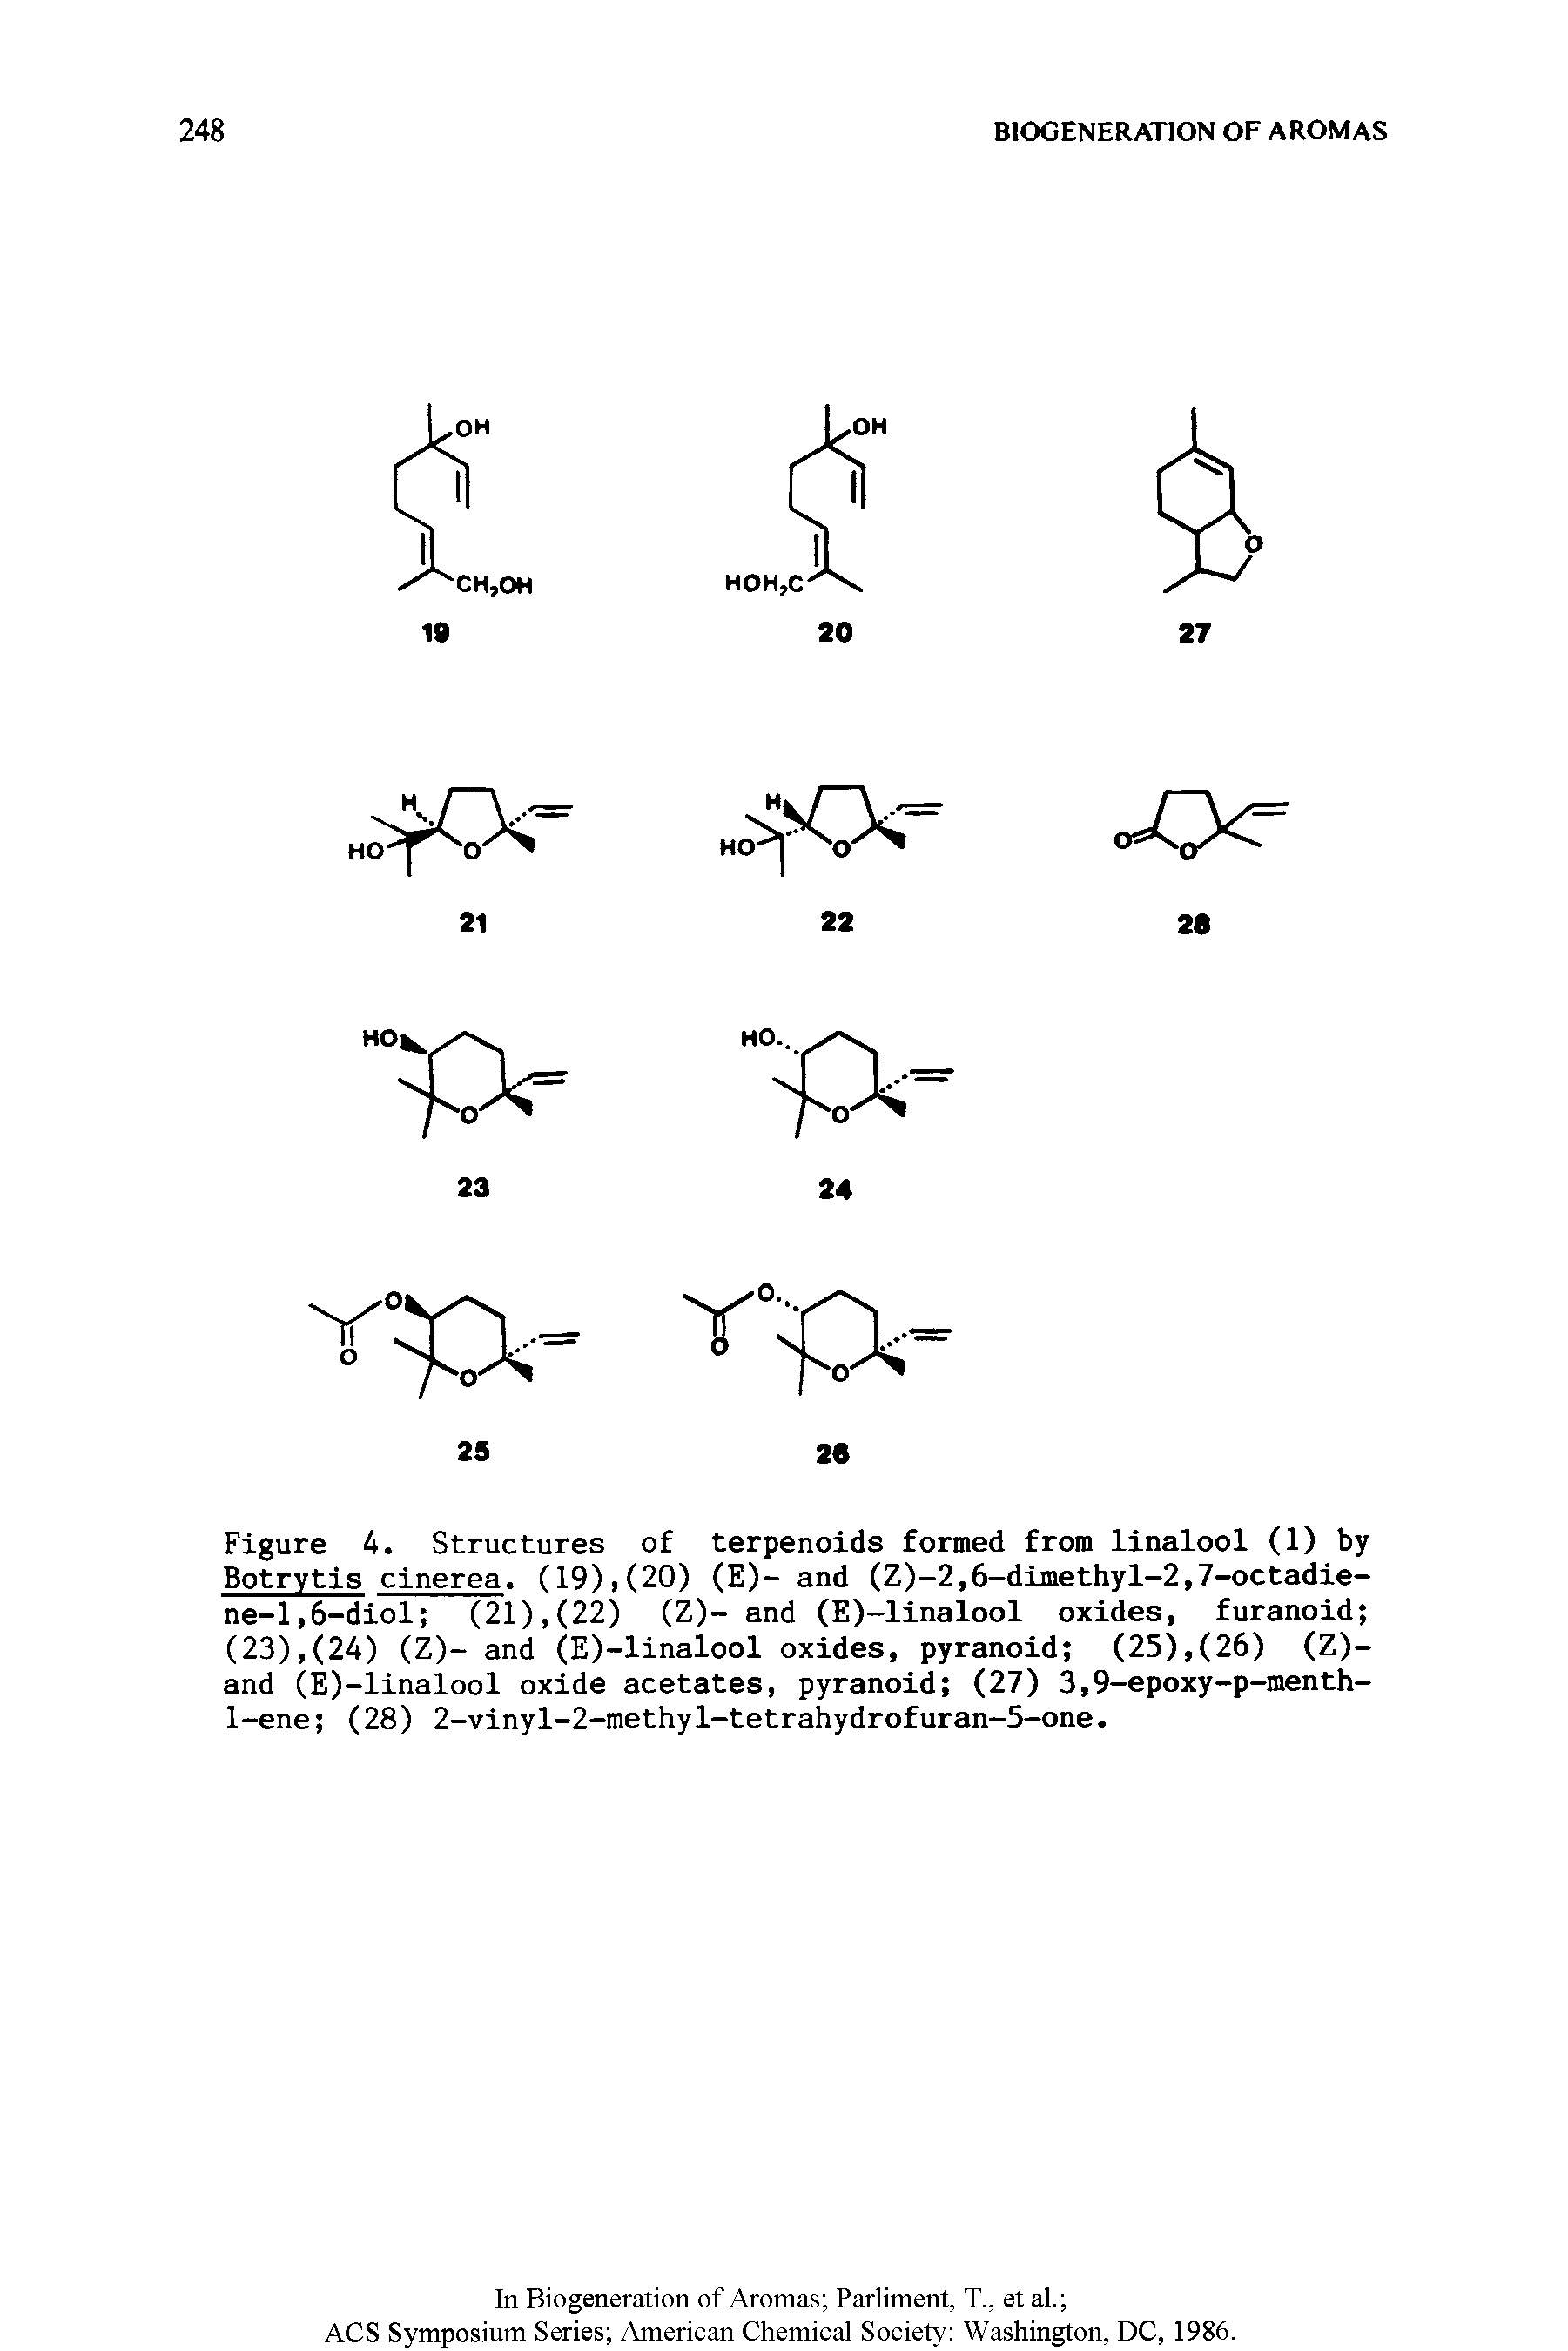 Figure 4. Structures of terpenoids formed from linalool (1) by Botrytis cinerea. (19)>(20) (E)- and (Z)-2,6-dimethyl-2,7-octadie-ne-l,6-diol (21),(22) (Z)- and (E)-linalool oxides, furanoid (23),(24) (Z)- and (E)-linalool oxides, pyranoid (25),(26) (Z)-and (E)-linalool oxide acetates, pyranoid (27) 3,9-epoxy-p-menth-1-ene (28) 2-vinyl-2-methyl-tetrahydrofuran-5-one.